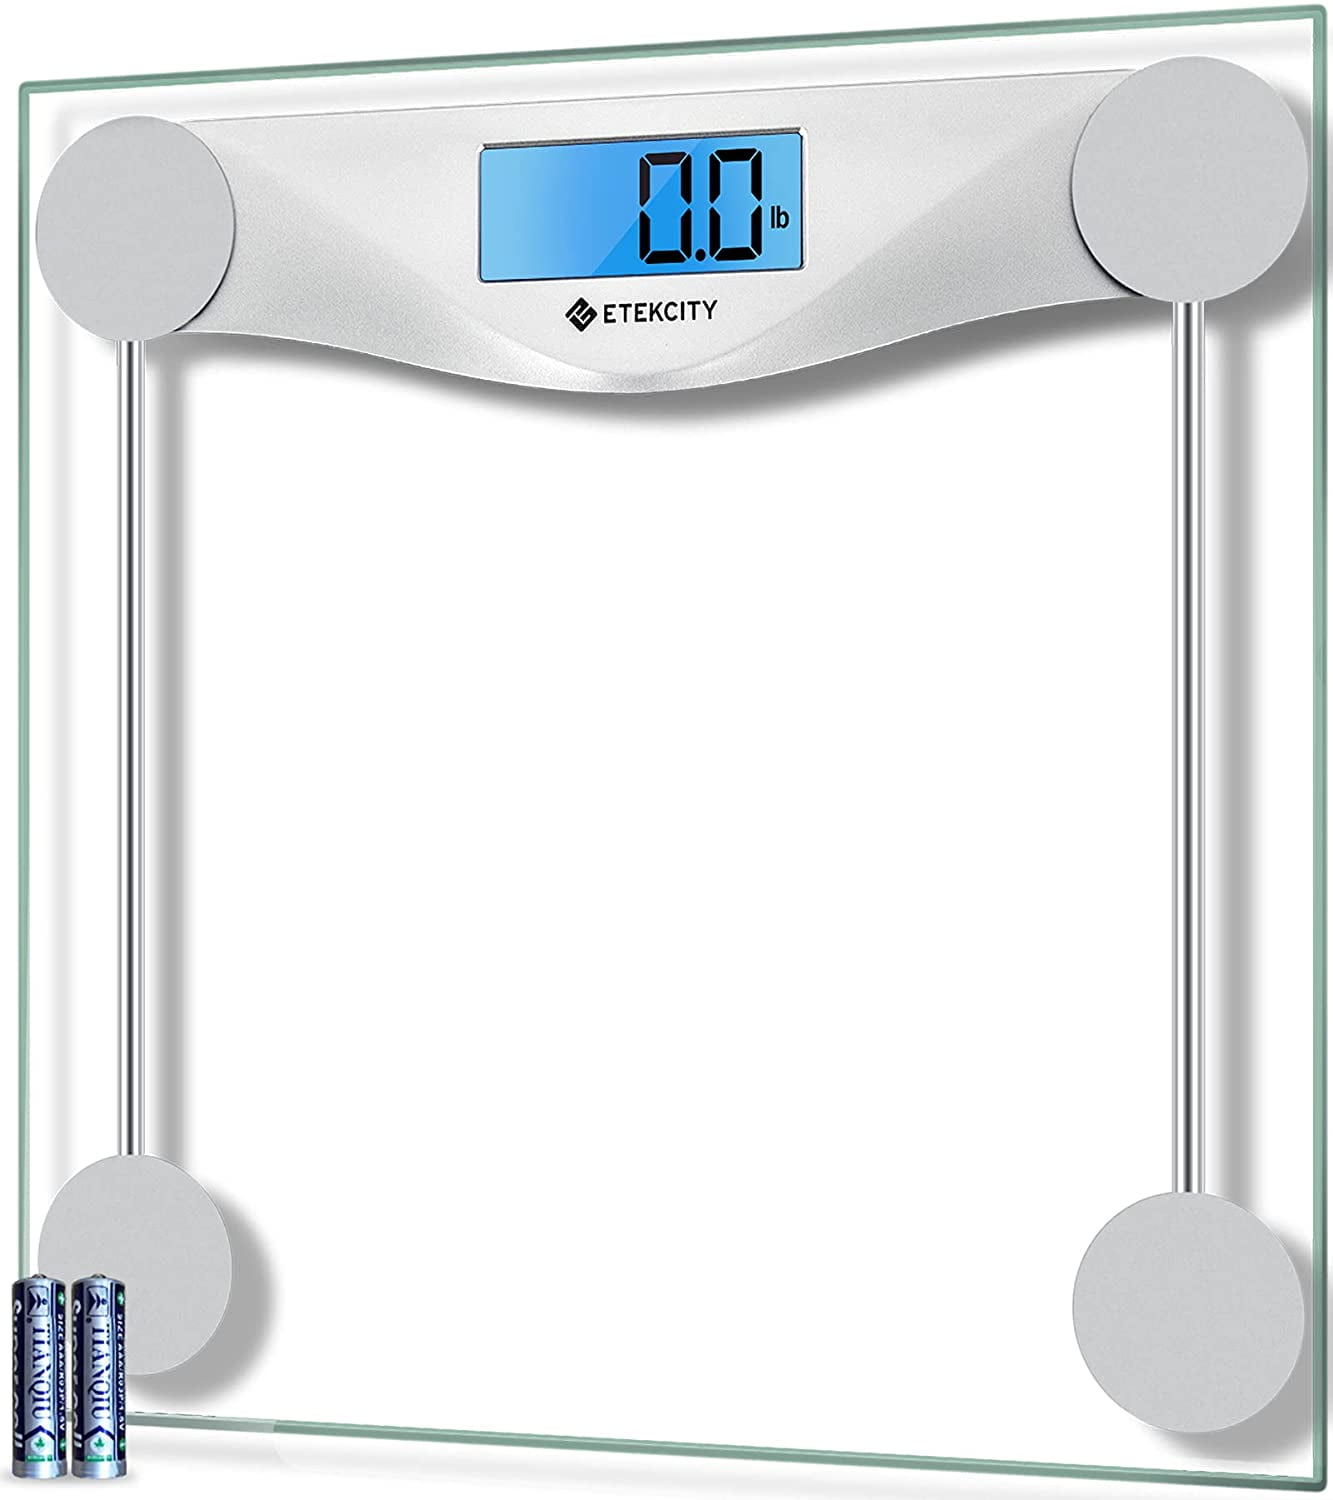 180KG DIGITAL BATHROOM WEIGHING GLASS SCALES Scale Healthy Fat Loss Analyser SS 